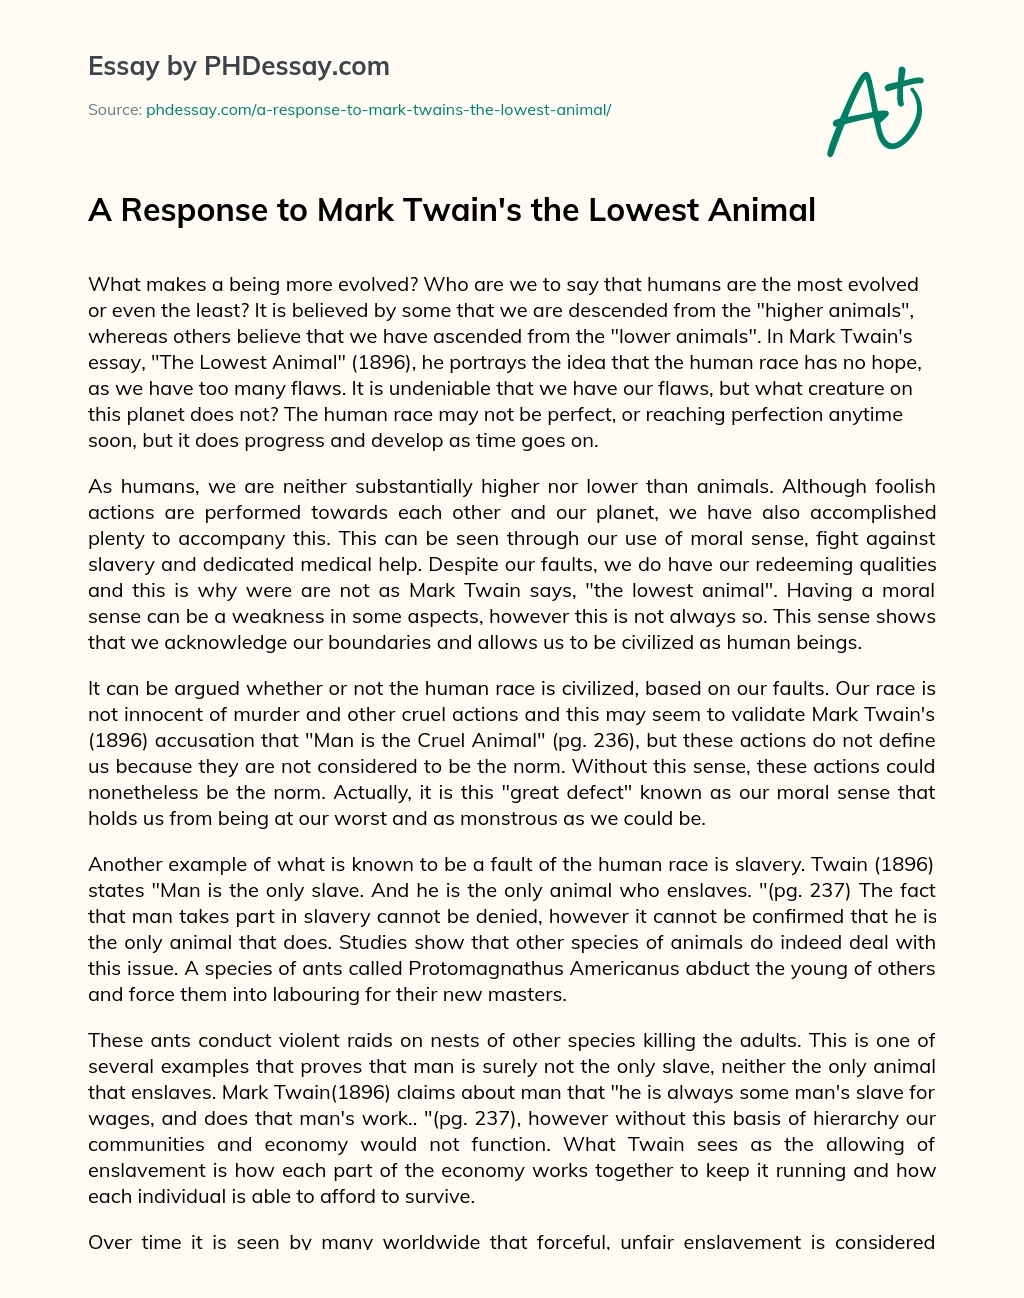 the lowest animal mark twain questions and answers